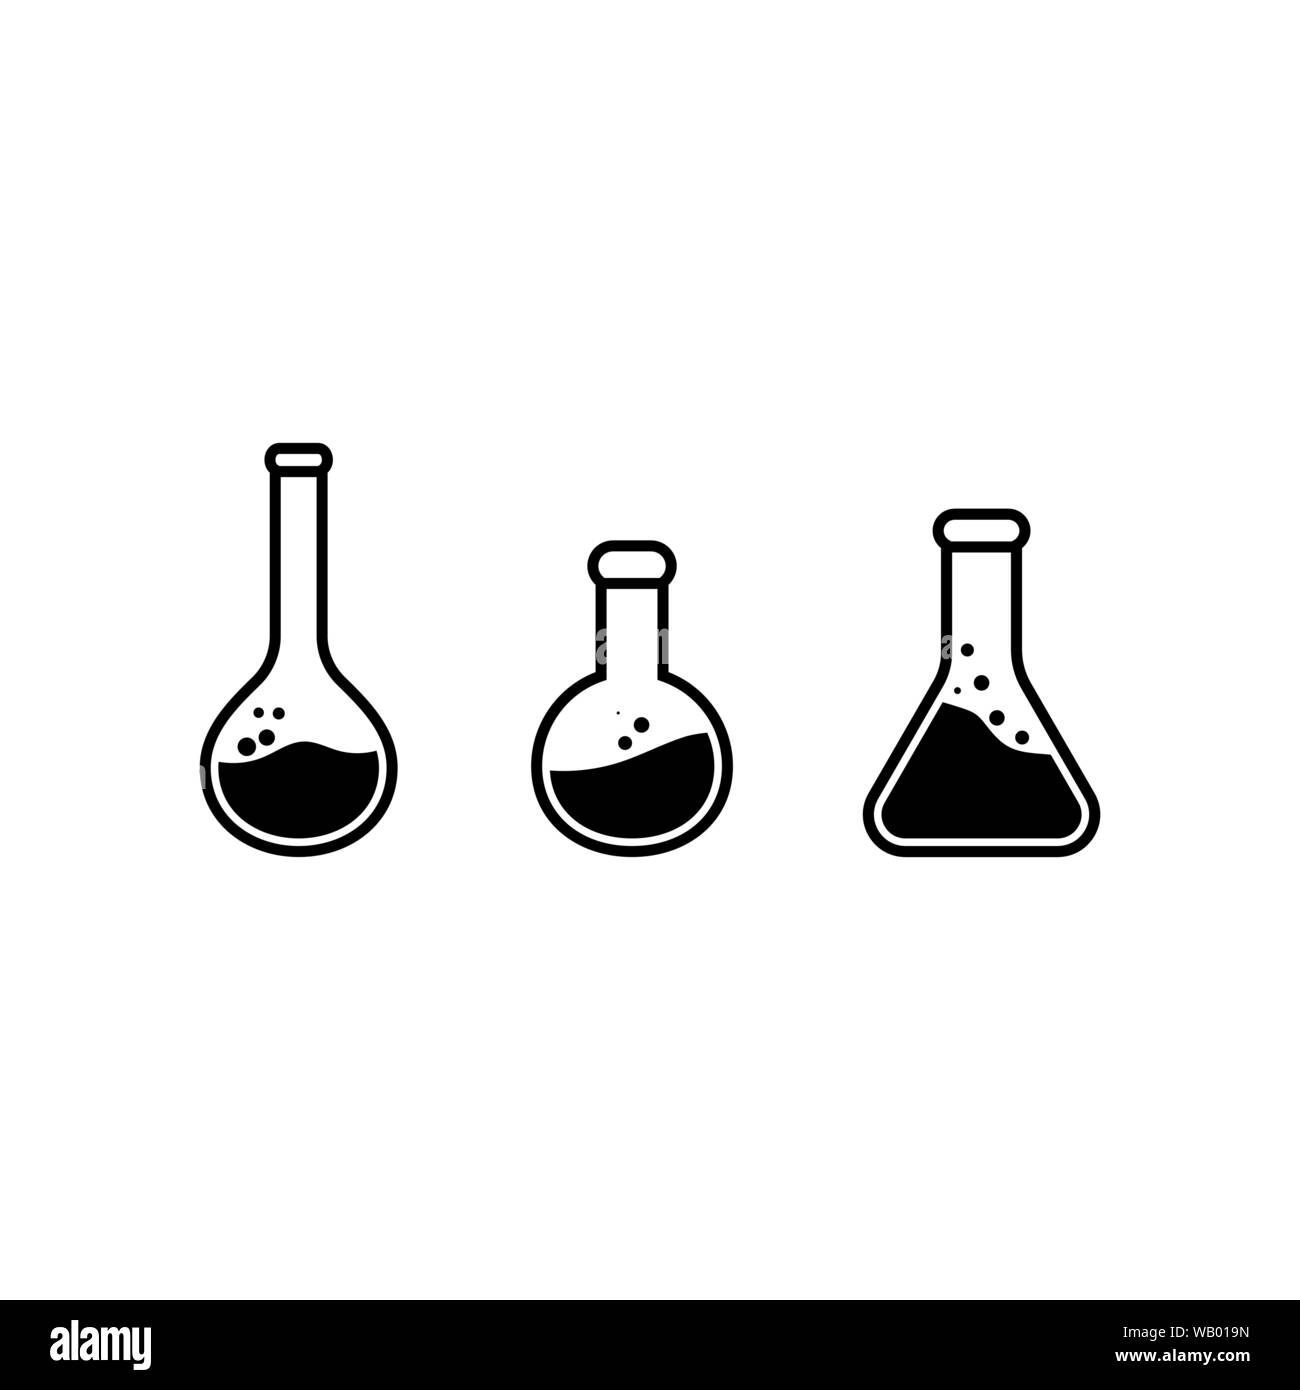 Health Medical Lab icon template vector illustration Stock Vector